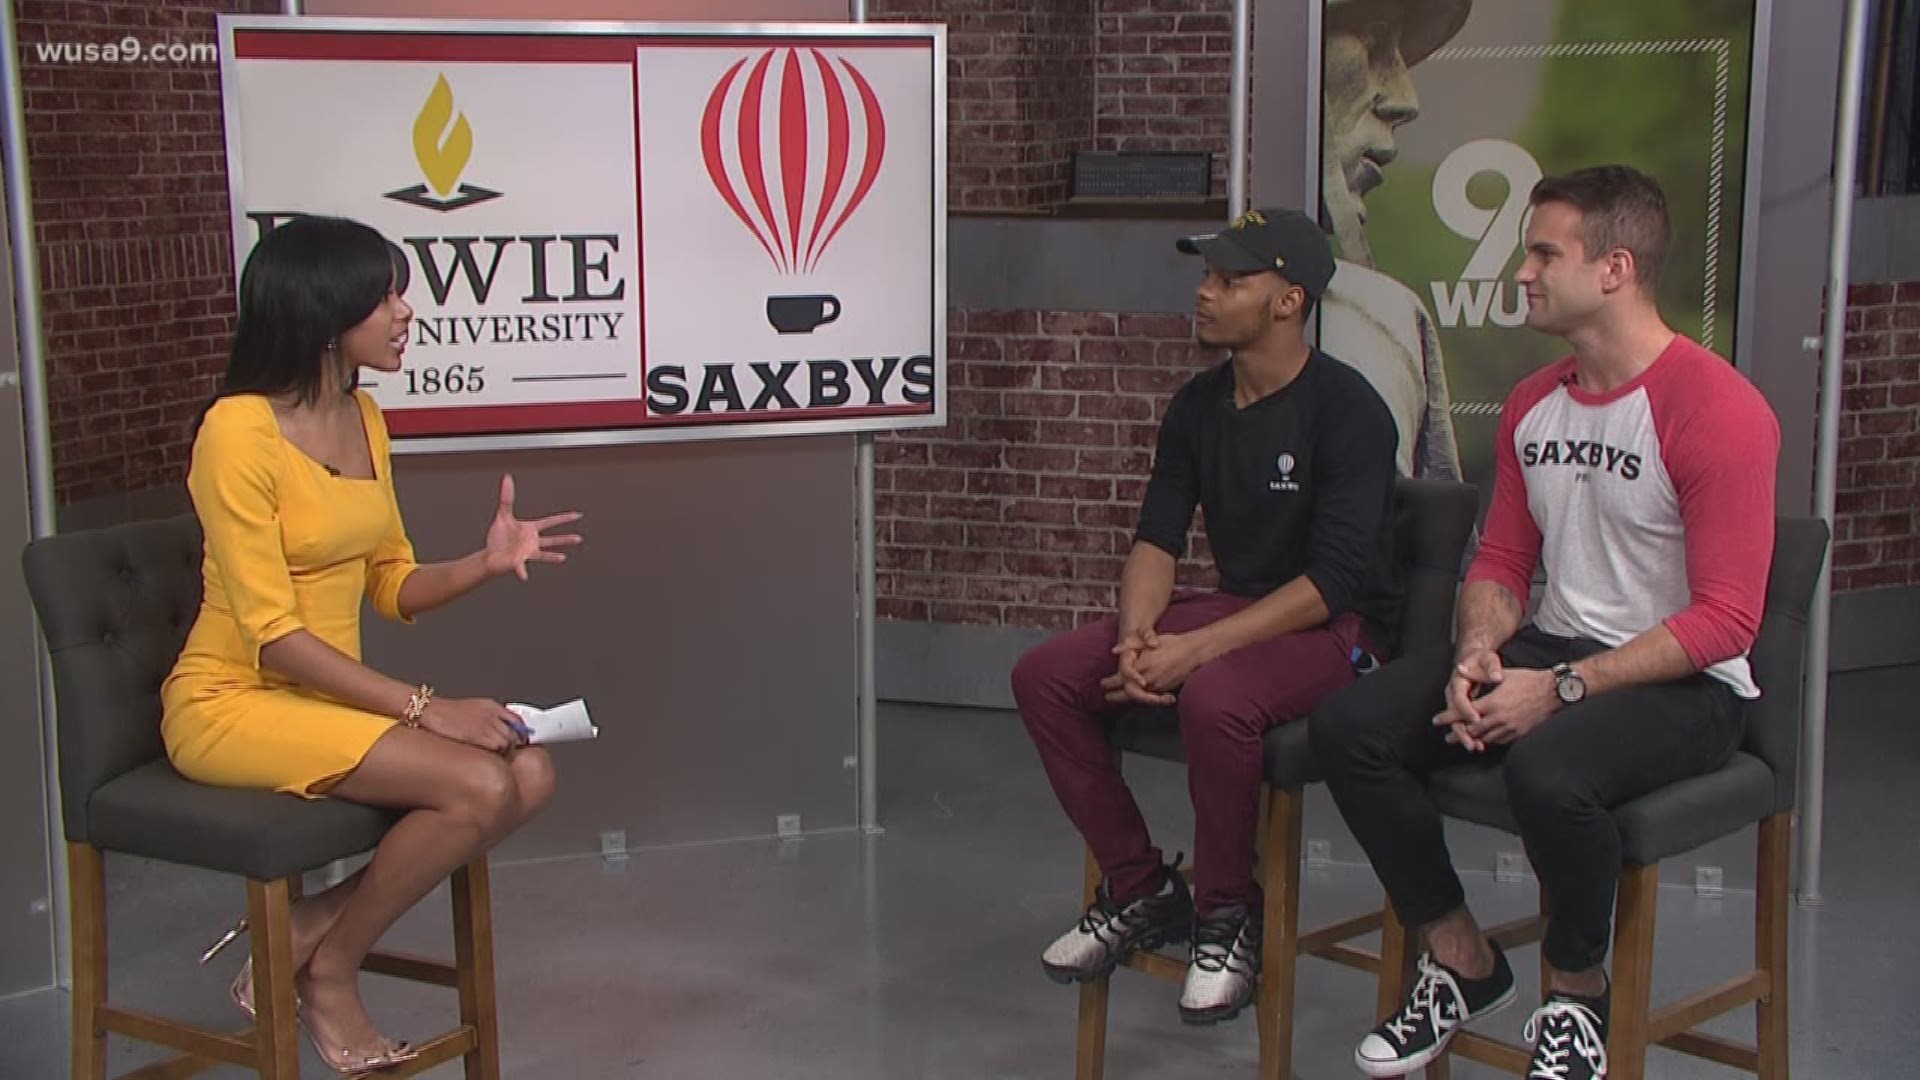 Bowie State University has partnered with Saxbys to bring the coffee company's experiential learning cafe.